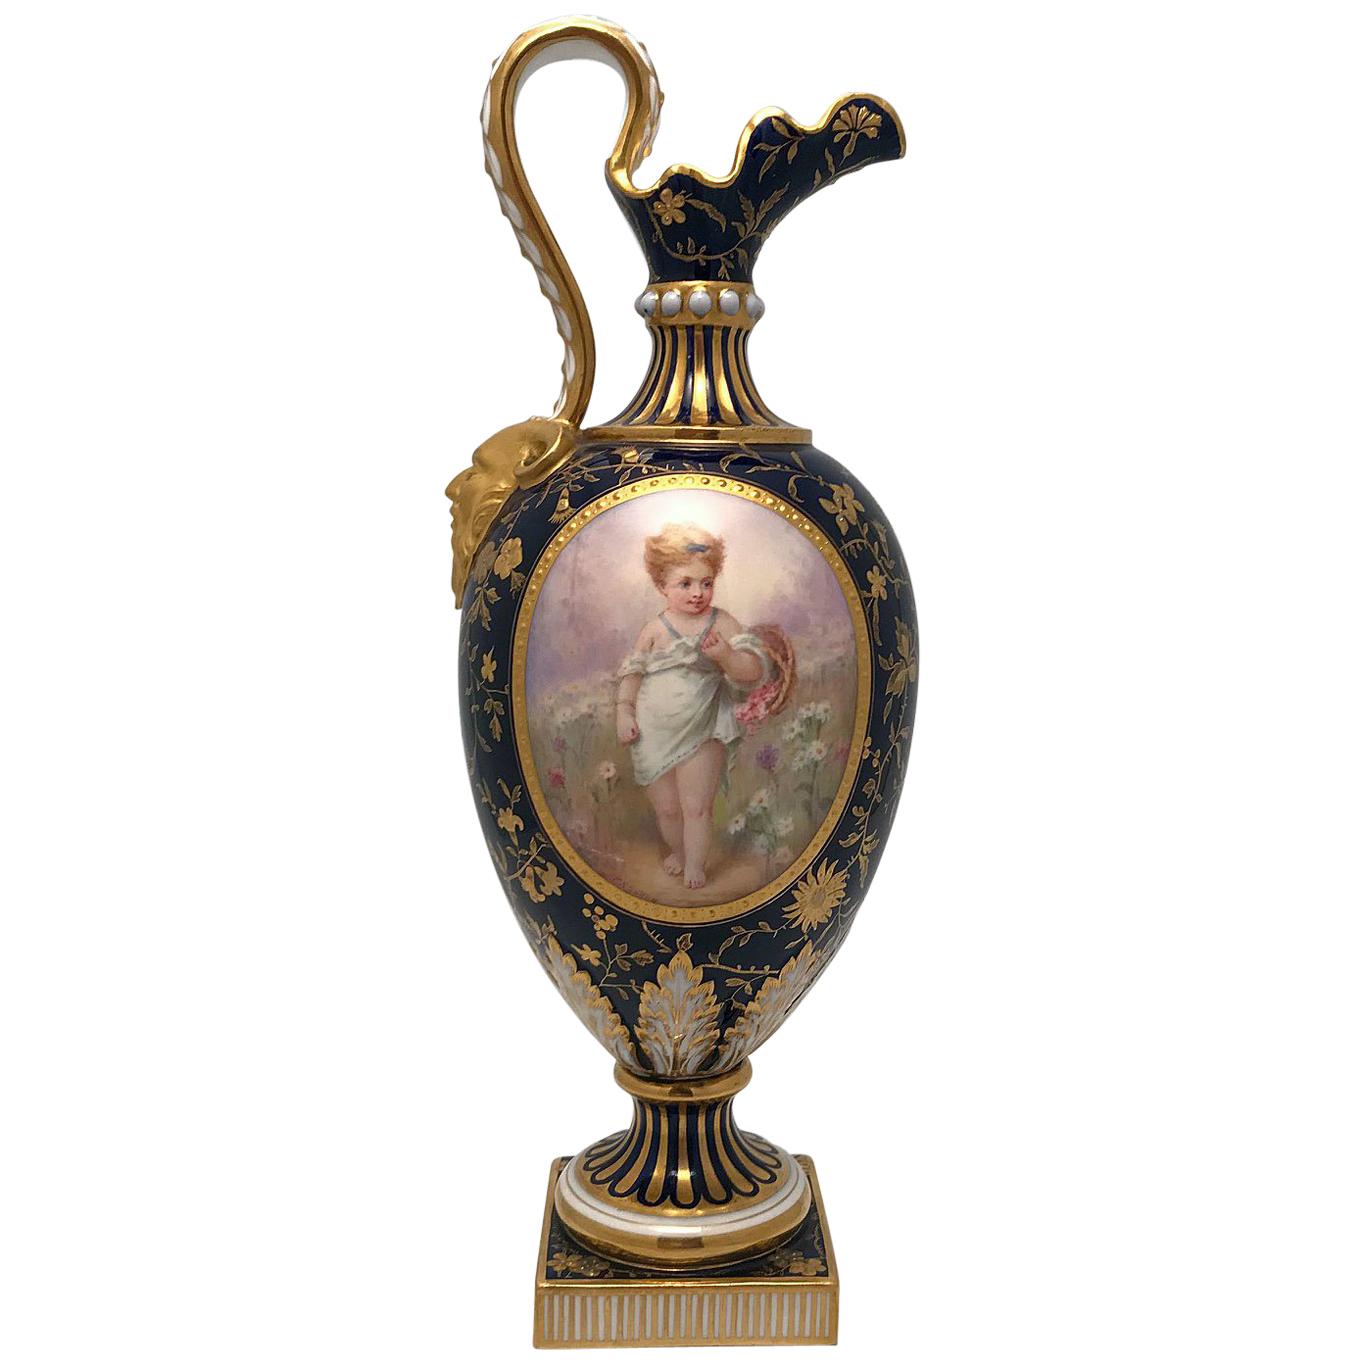 Minton Porcelain Ewer, Painted with a Child on a Blue and Gilt Ground